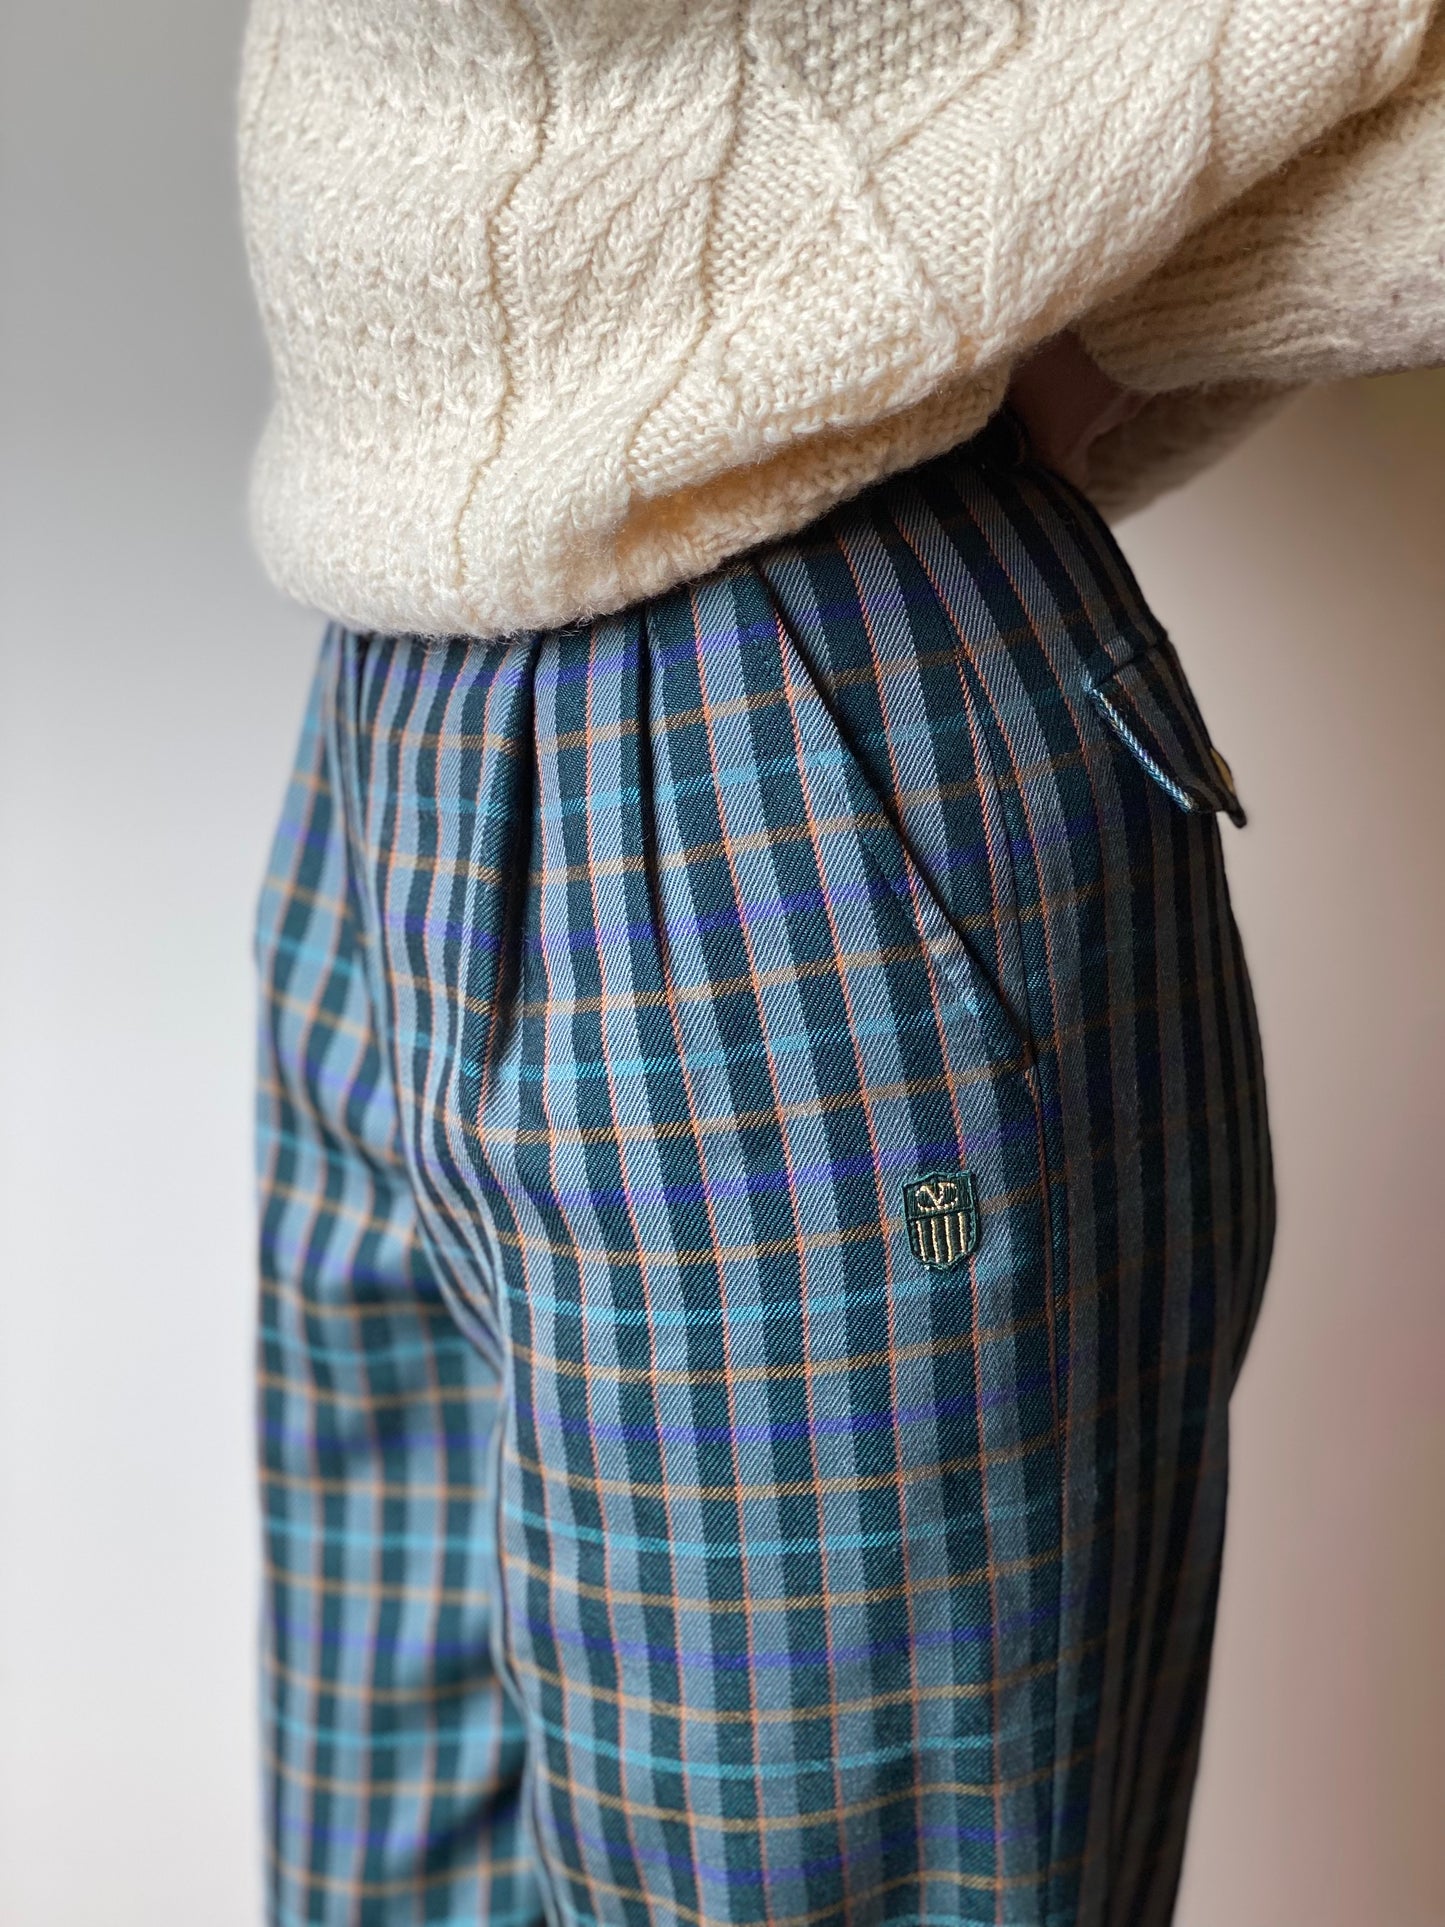 Vintage Valentino Checkered Trousers